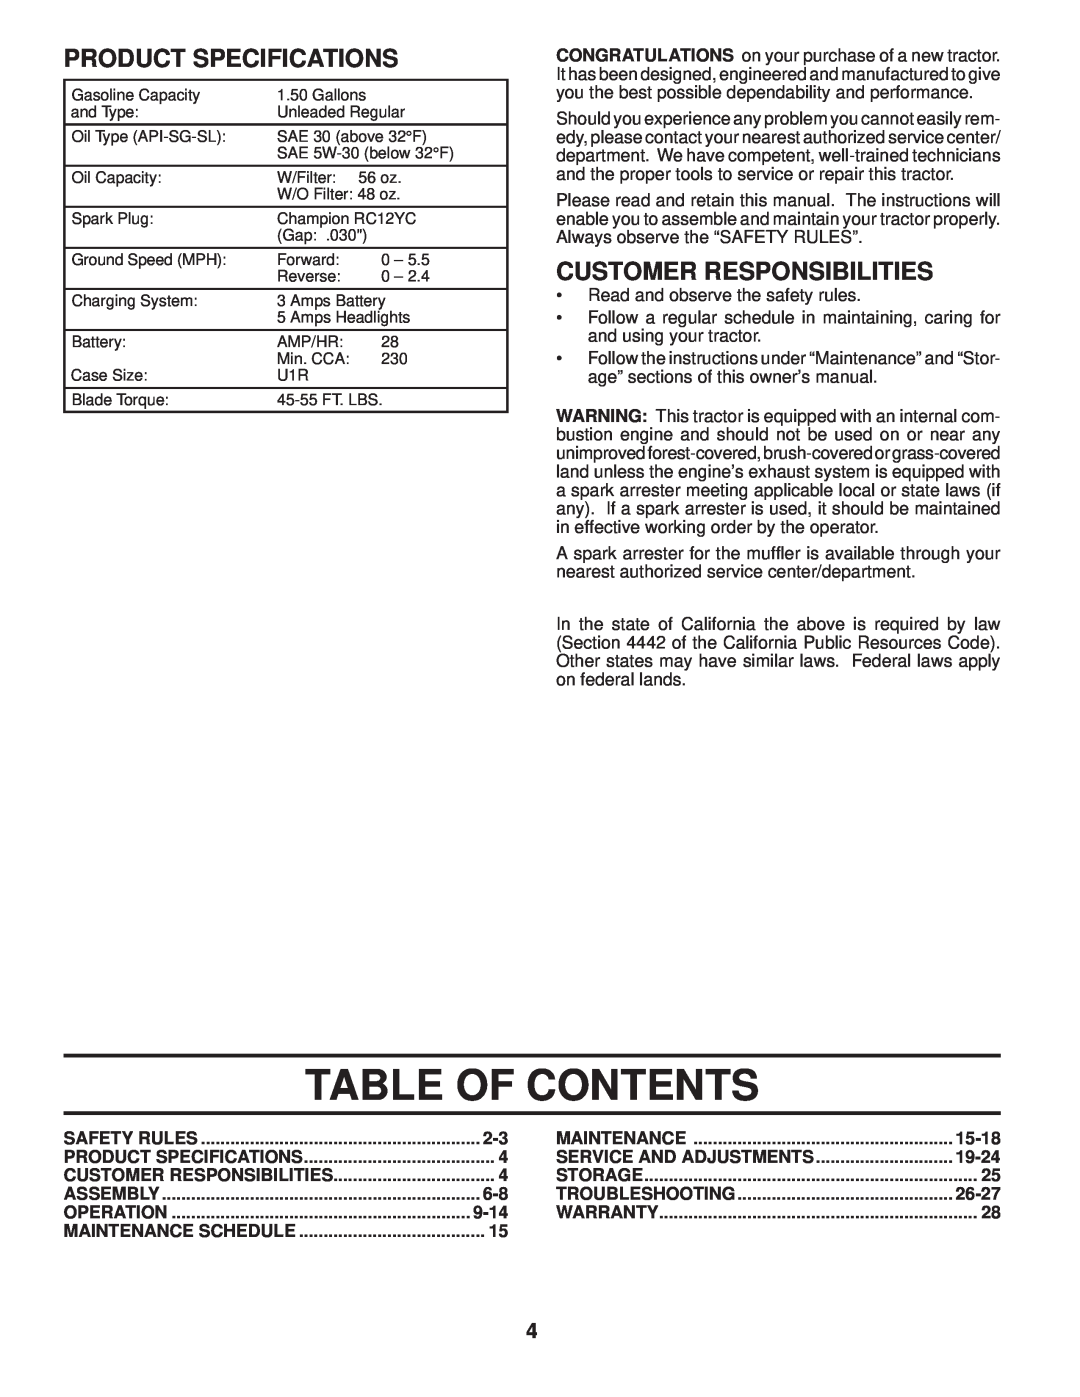 Poulan 411274, 96042004201 manual Table Of Contents, Product Specifications, Customer Responsibilities 